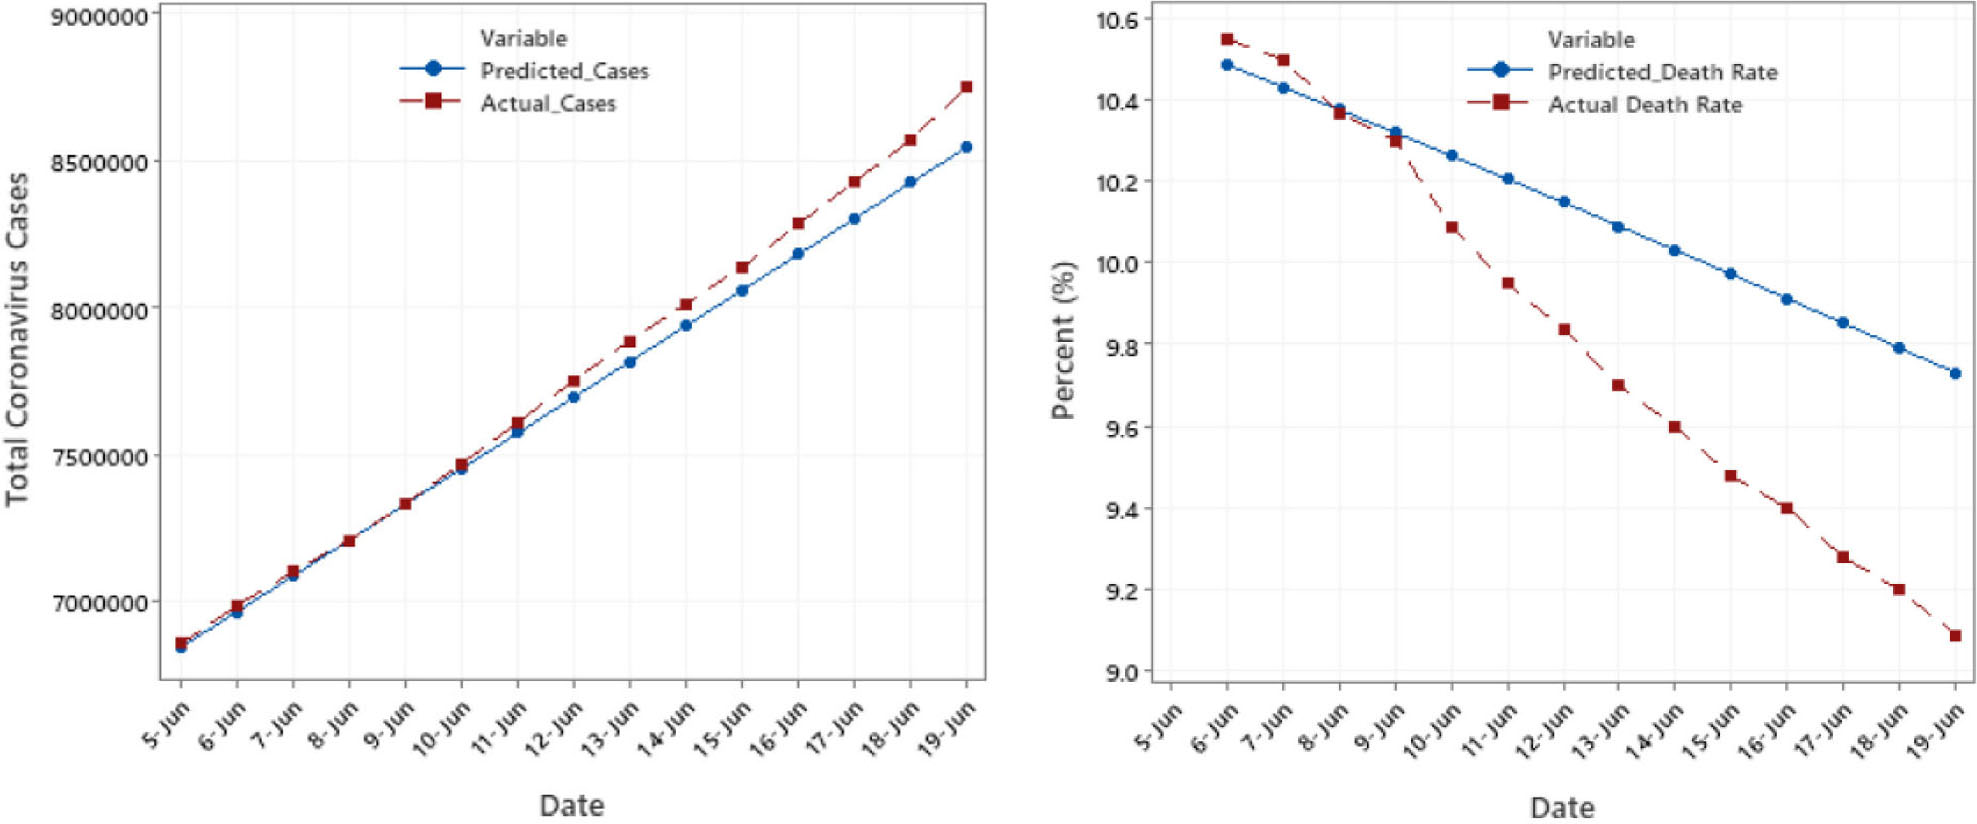 Forecasts and Actual values in total confirmed cases and death rate.